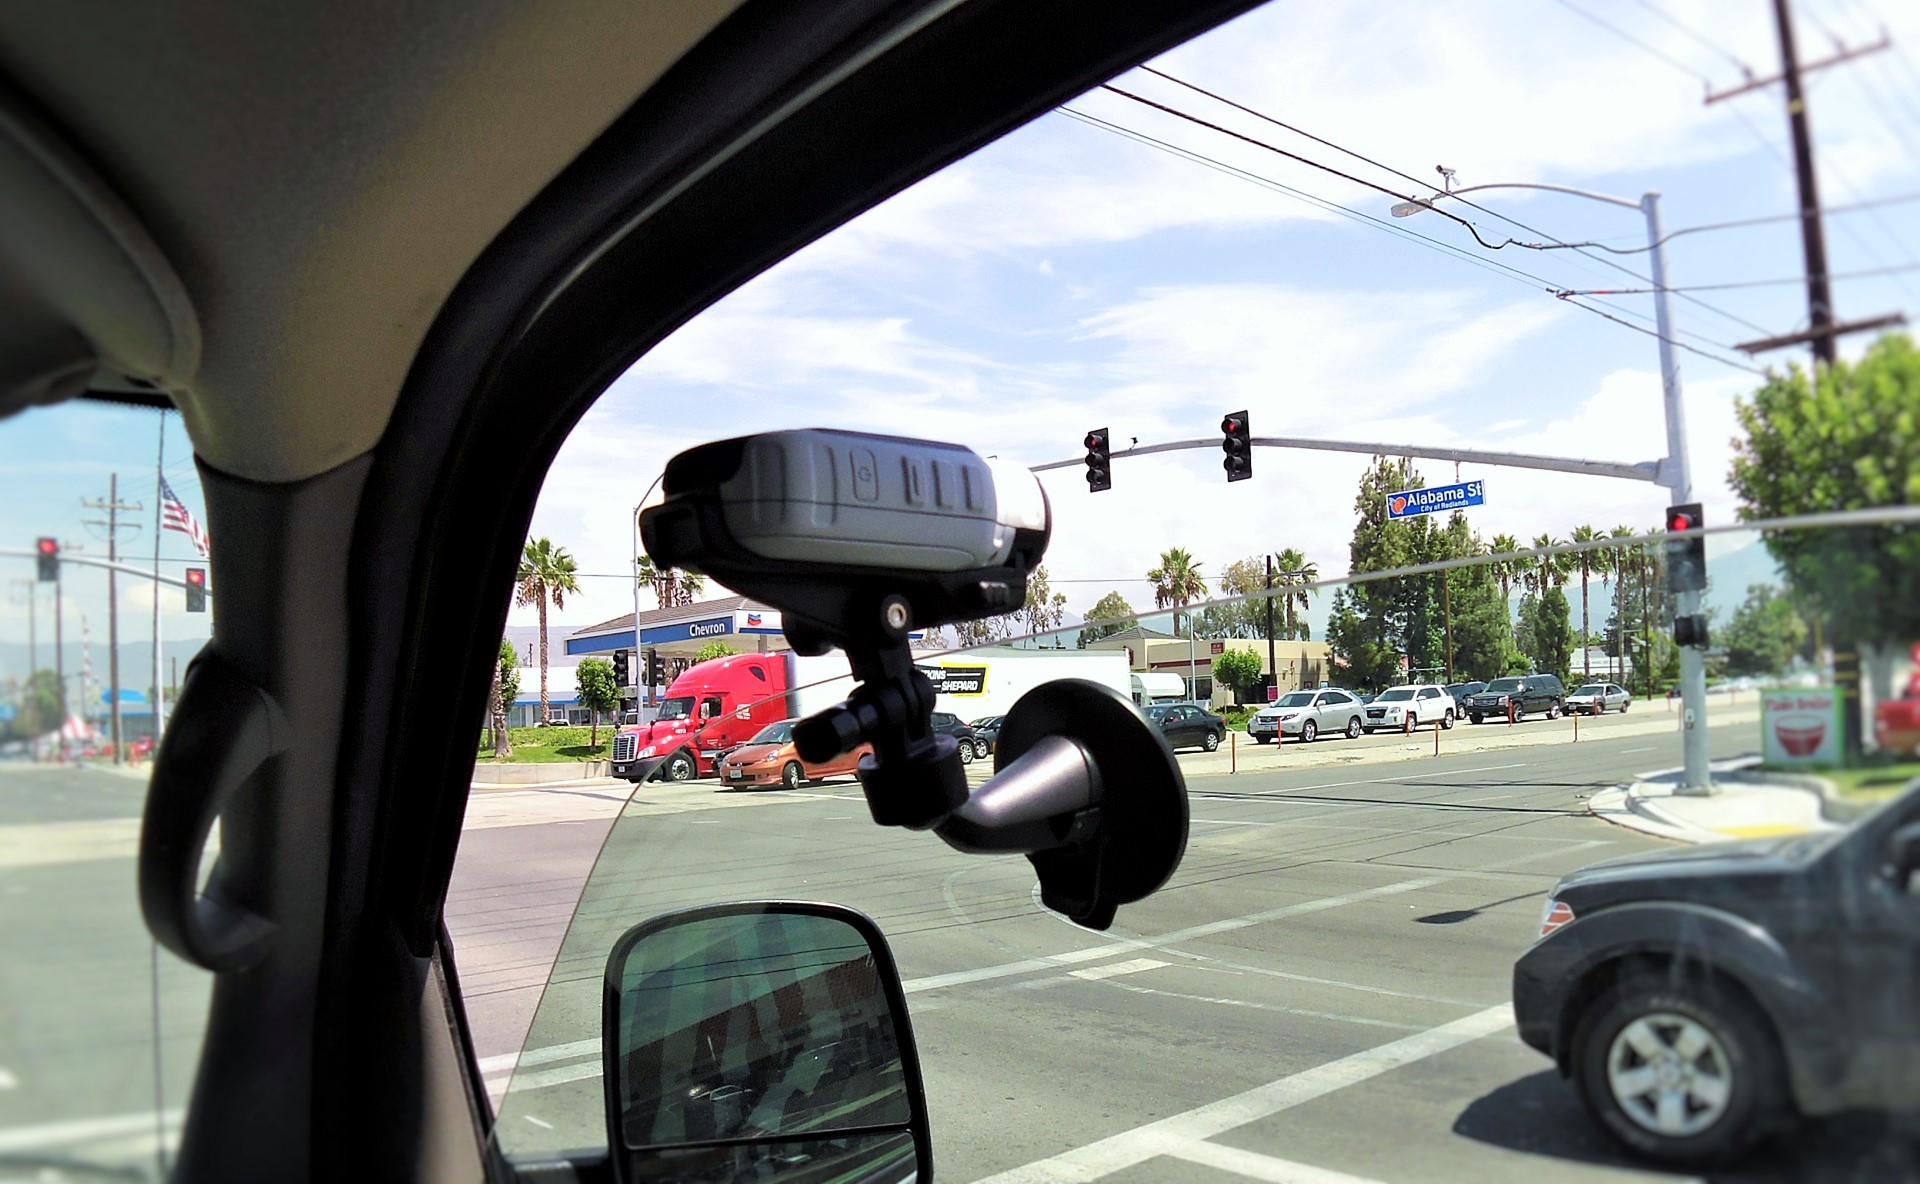 Camera capturing street-level photos from a vehicle